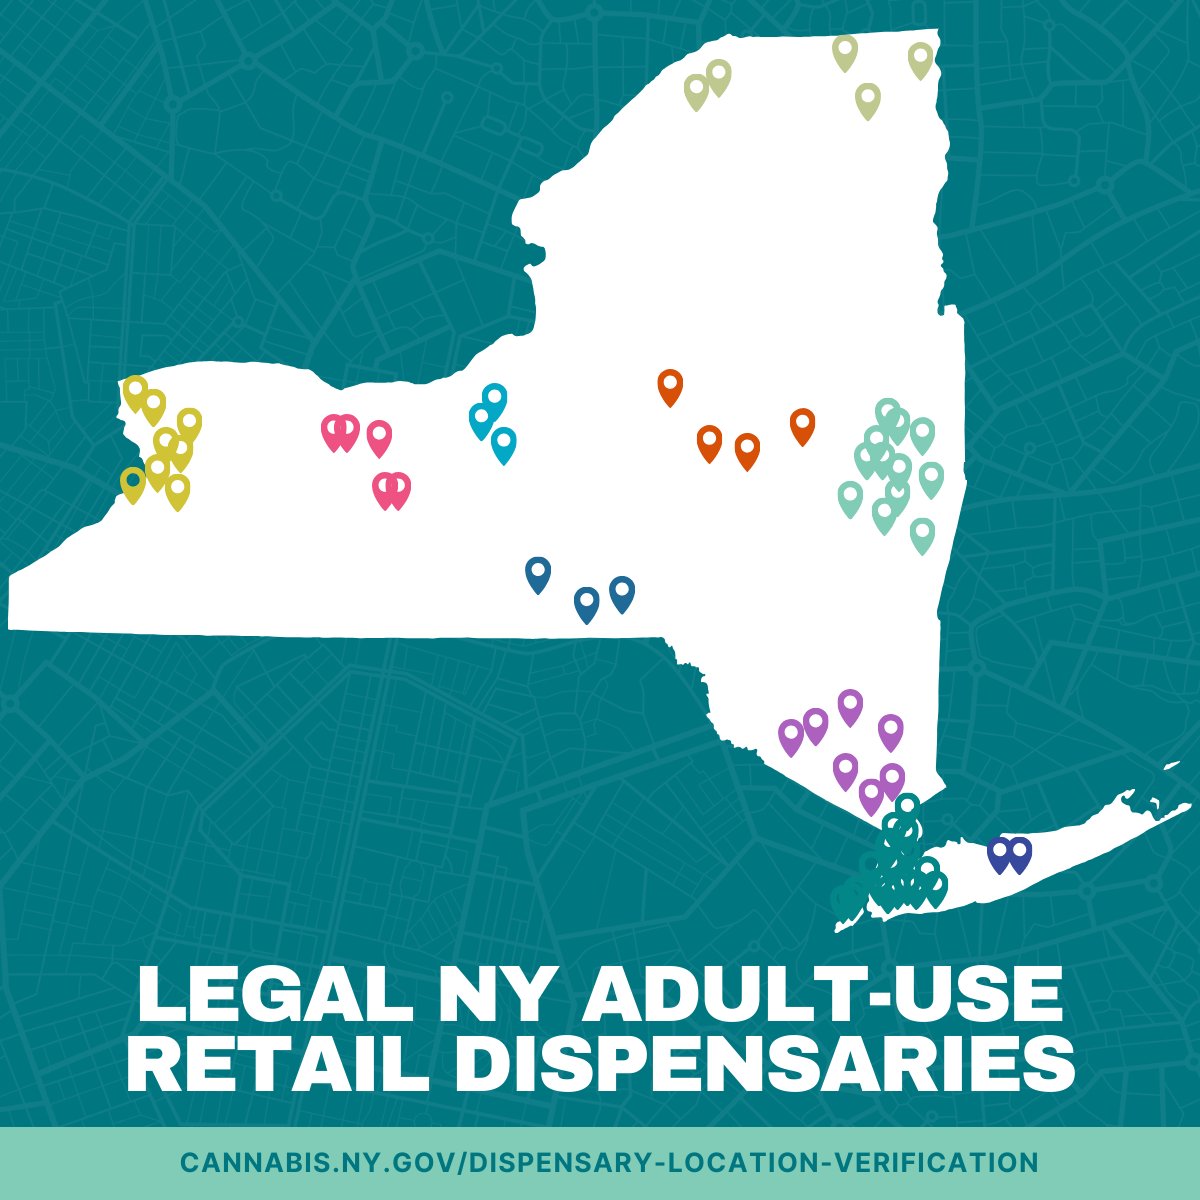 #NYcannabis is reaching new heights with 90 AU retail dispensaries now open statewide. These legal dispensaries offer: 🌿 Safer cannabis products 💼 Local job opportunities 📈 Economic growth 💵 Community reinvestment 📍 Find your local dispensary: cannabis.ny.gov/dispensary-loc…